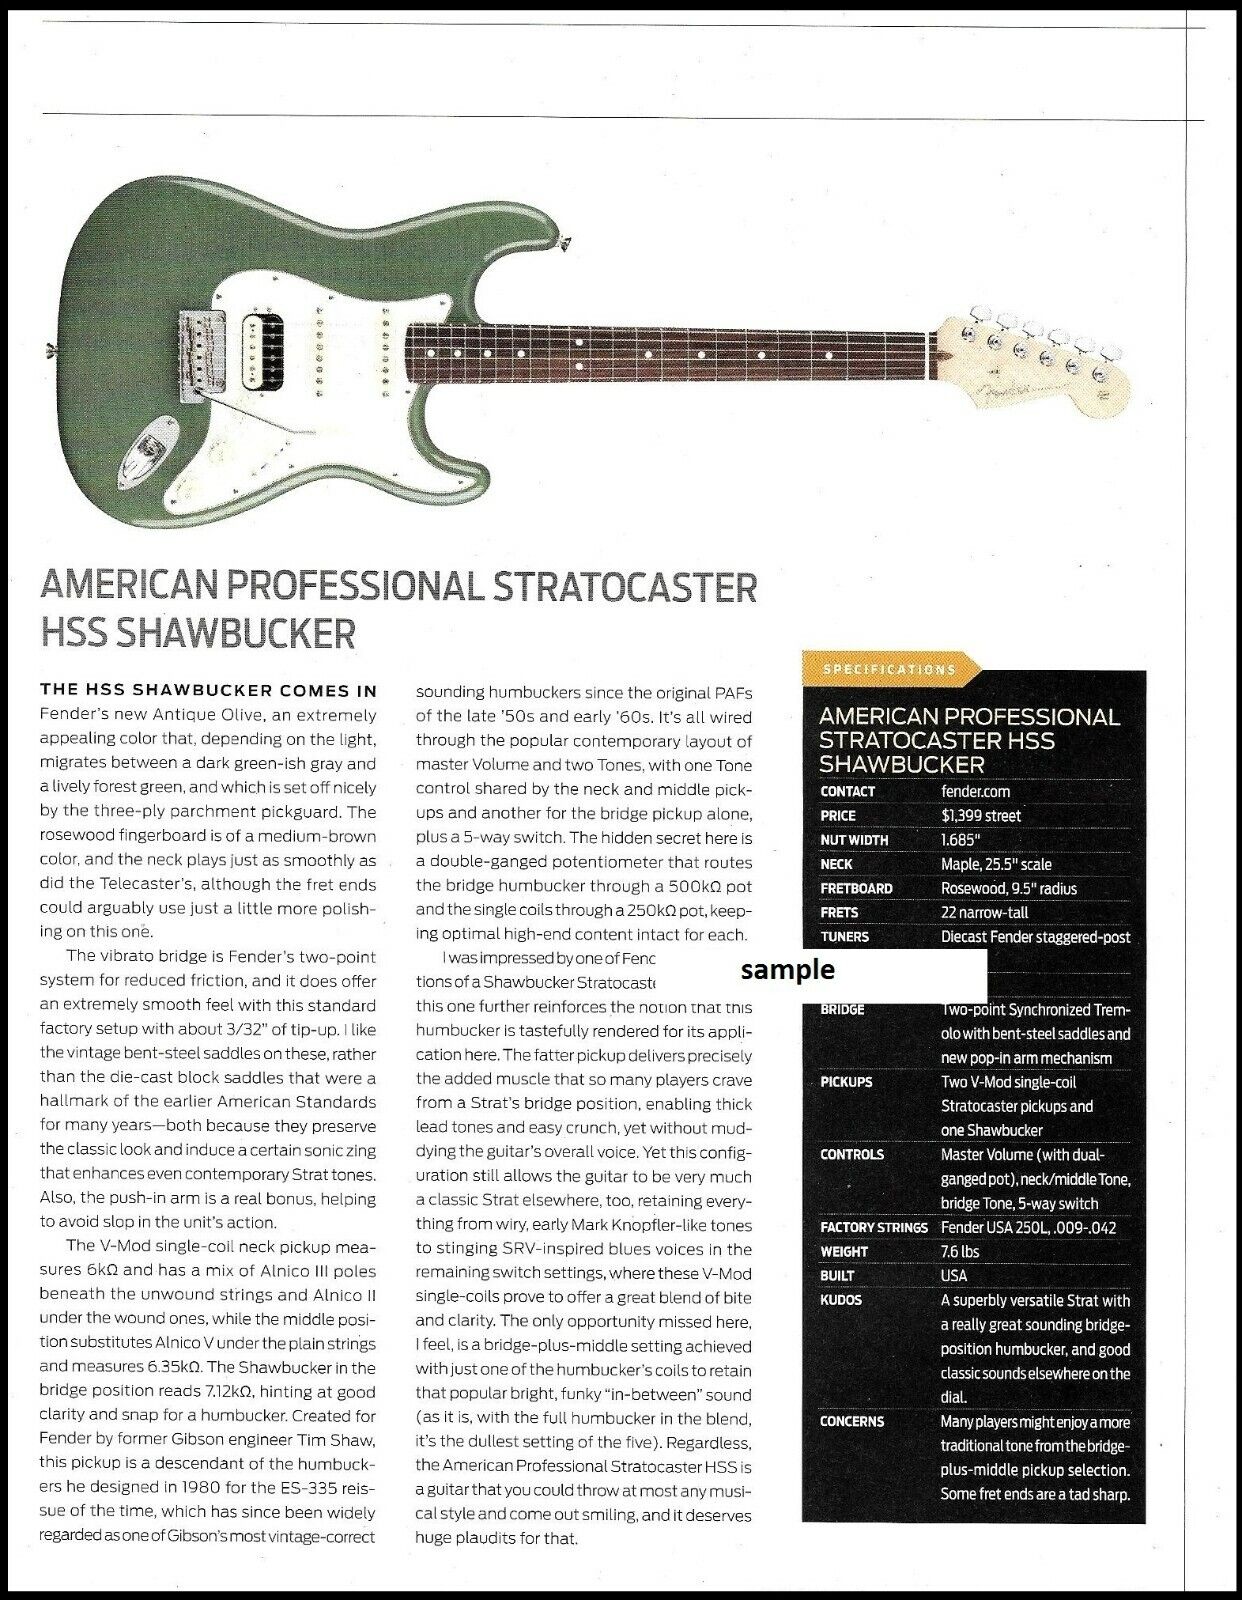 Fender American Professional Stratocaster + Jazzmaster guitar review with specs